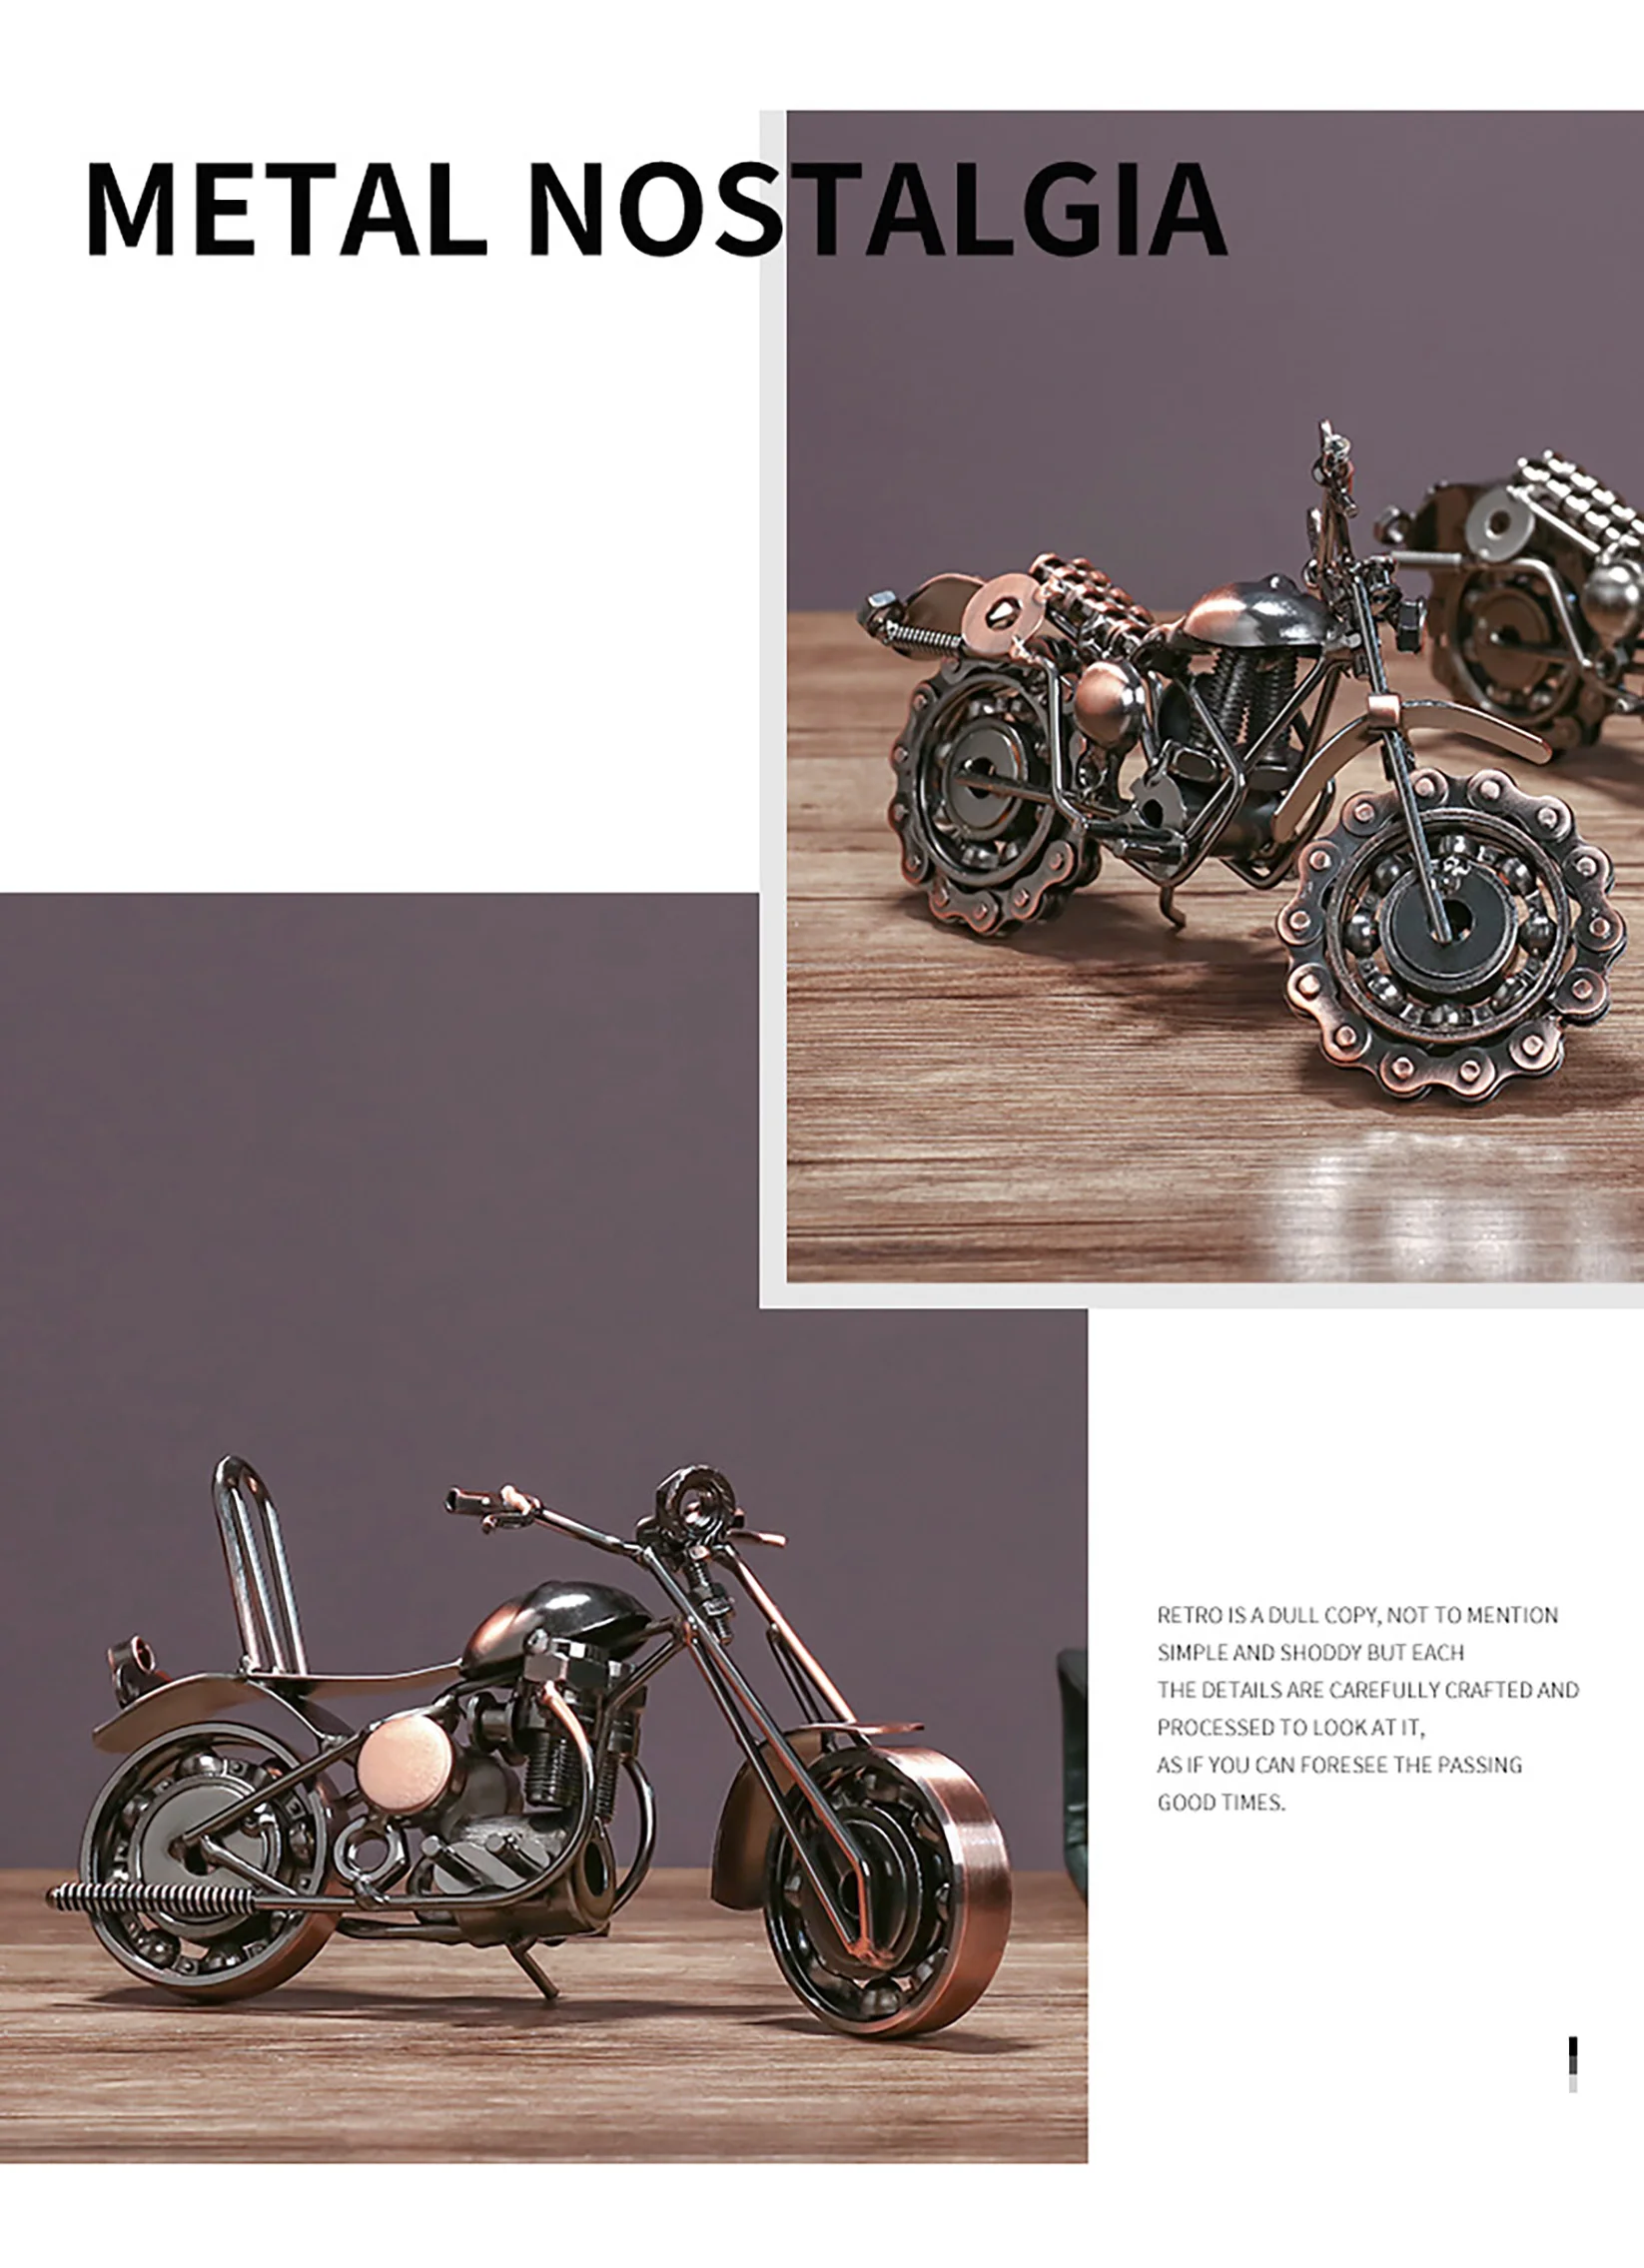 Cooper Creative Retro Iron Art Motorcycle Model Metal Moto Collection Simple Modern Home Decor Ornaments for Motocycle Lovers